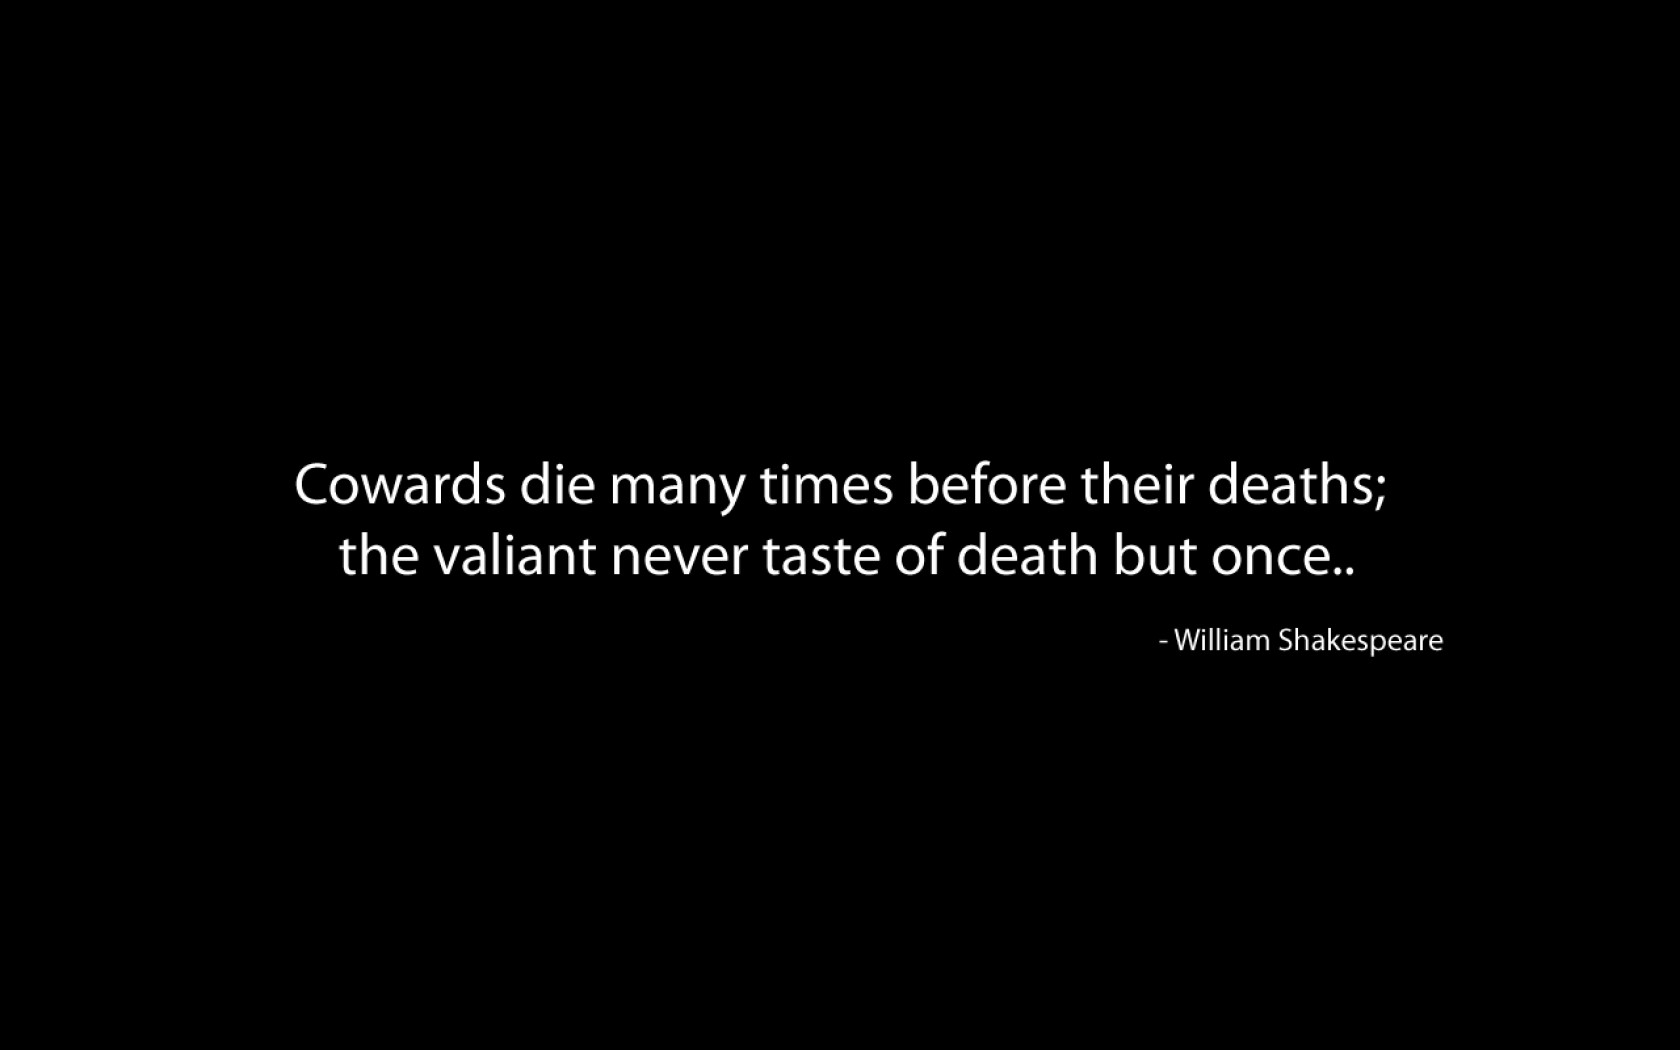 Famous and Toplevel William Shakespeare Quotes DesignOval